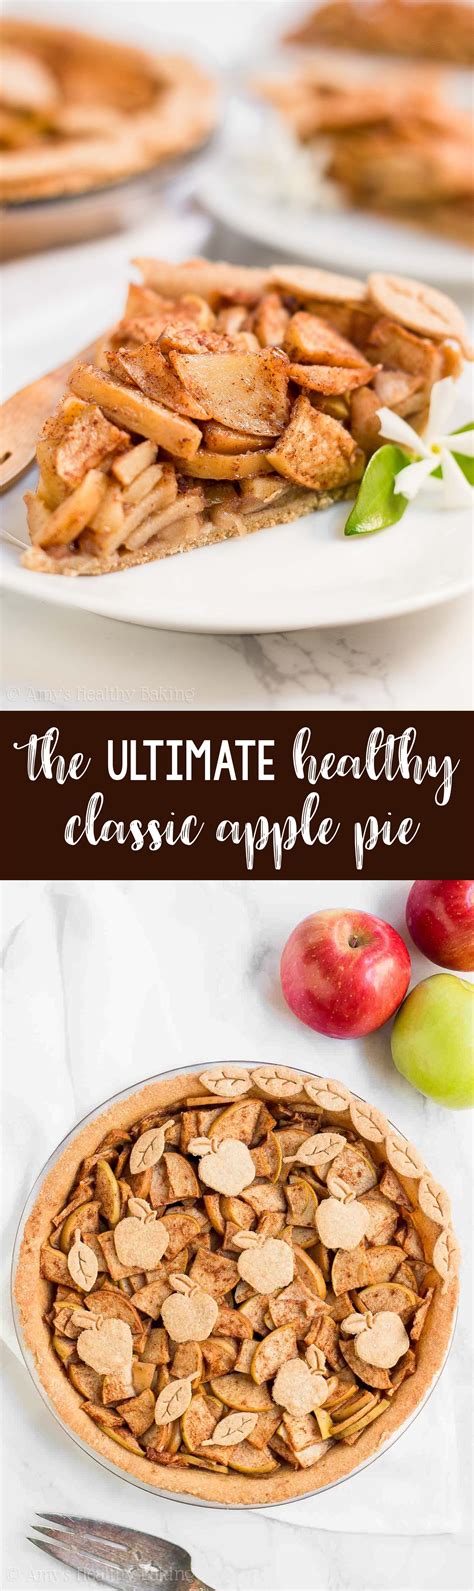 The Ultimate Healthy Apple Pie Recipe Truly The Best Apple Pie I Ve